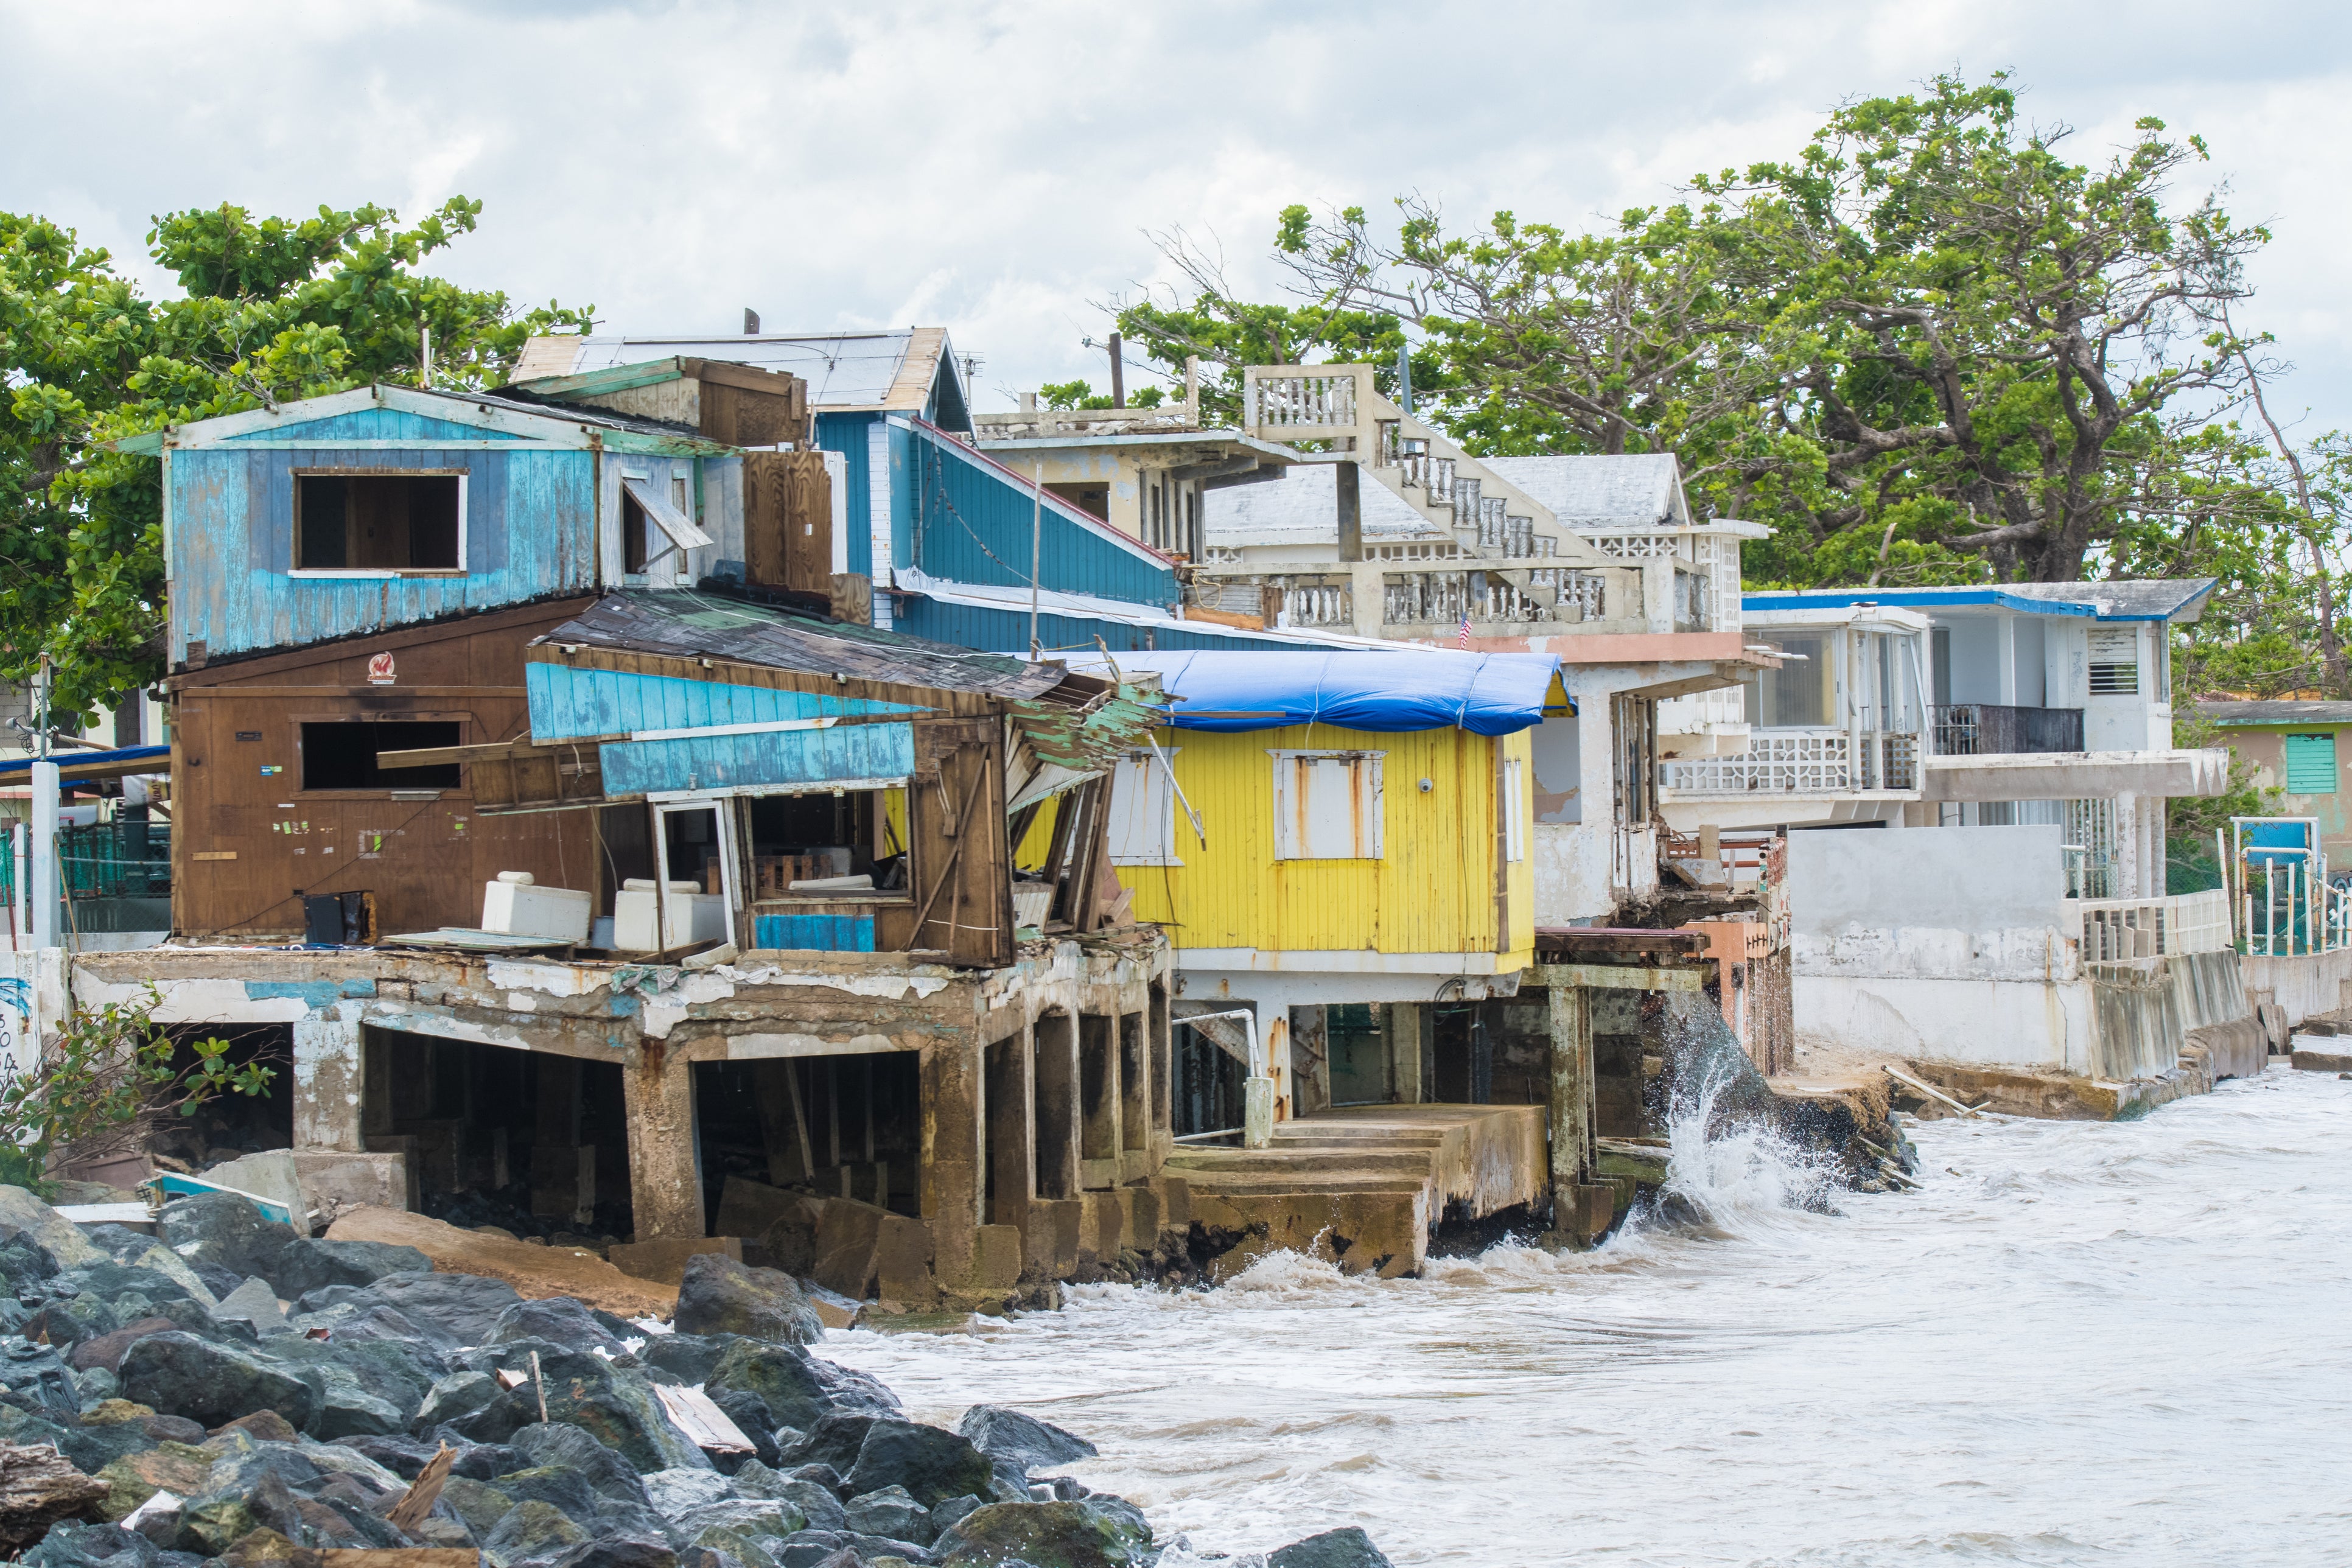 More than half of the damages caused by Hurricane Maria in Puerto Rico can be attributed to climate change, a study estimates